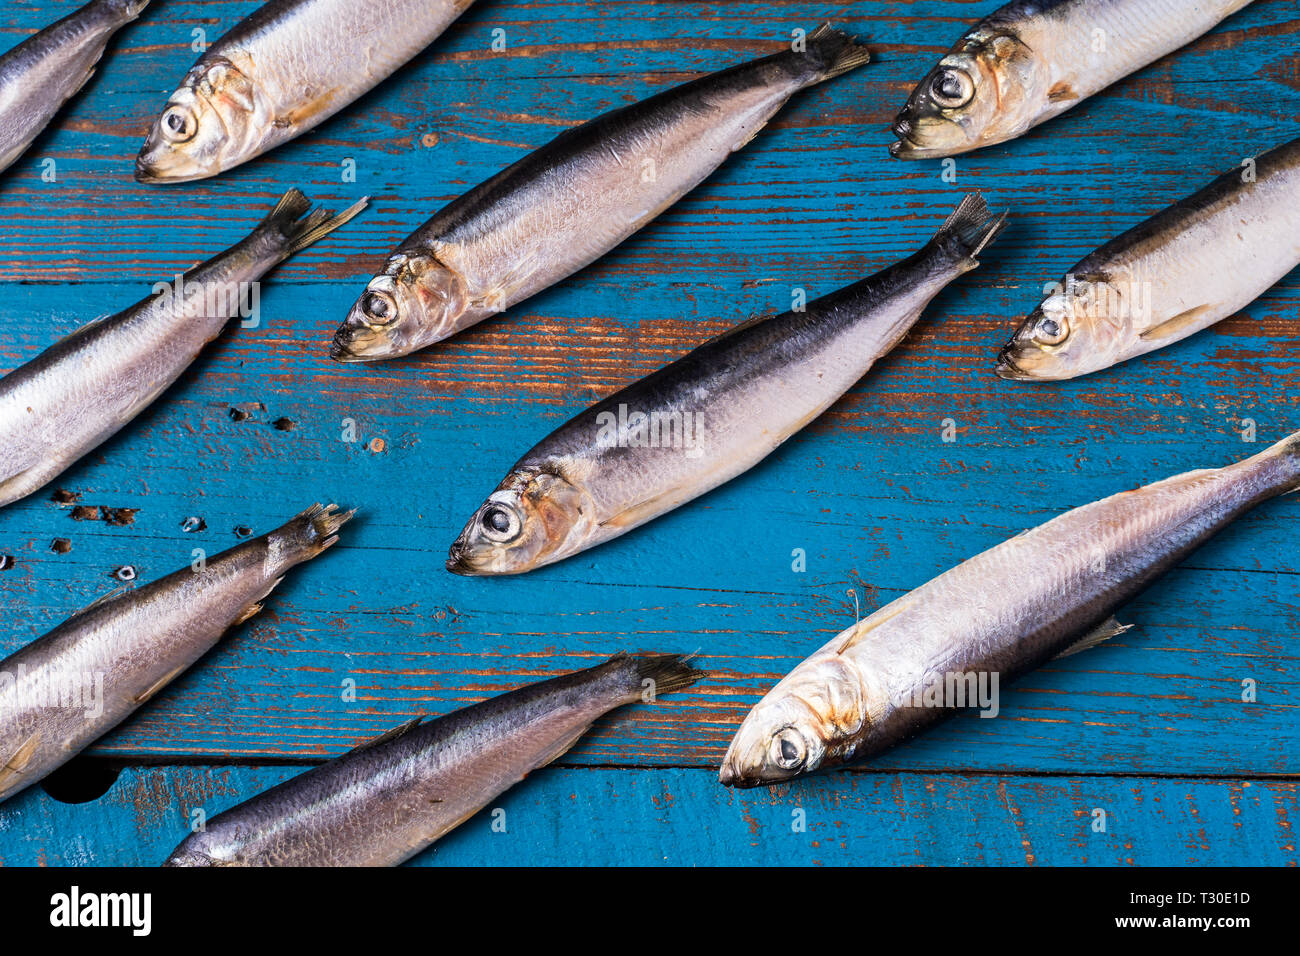 Rustic style. Fish pattern. Herring fish on an old blue wooden background, flat lay, top view. Stock Photo